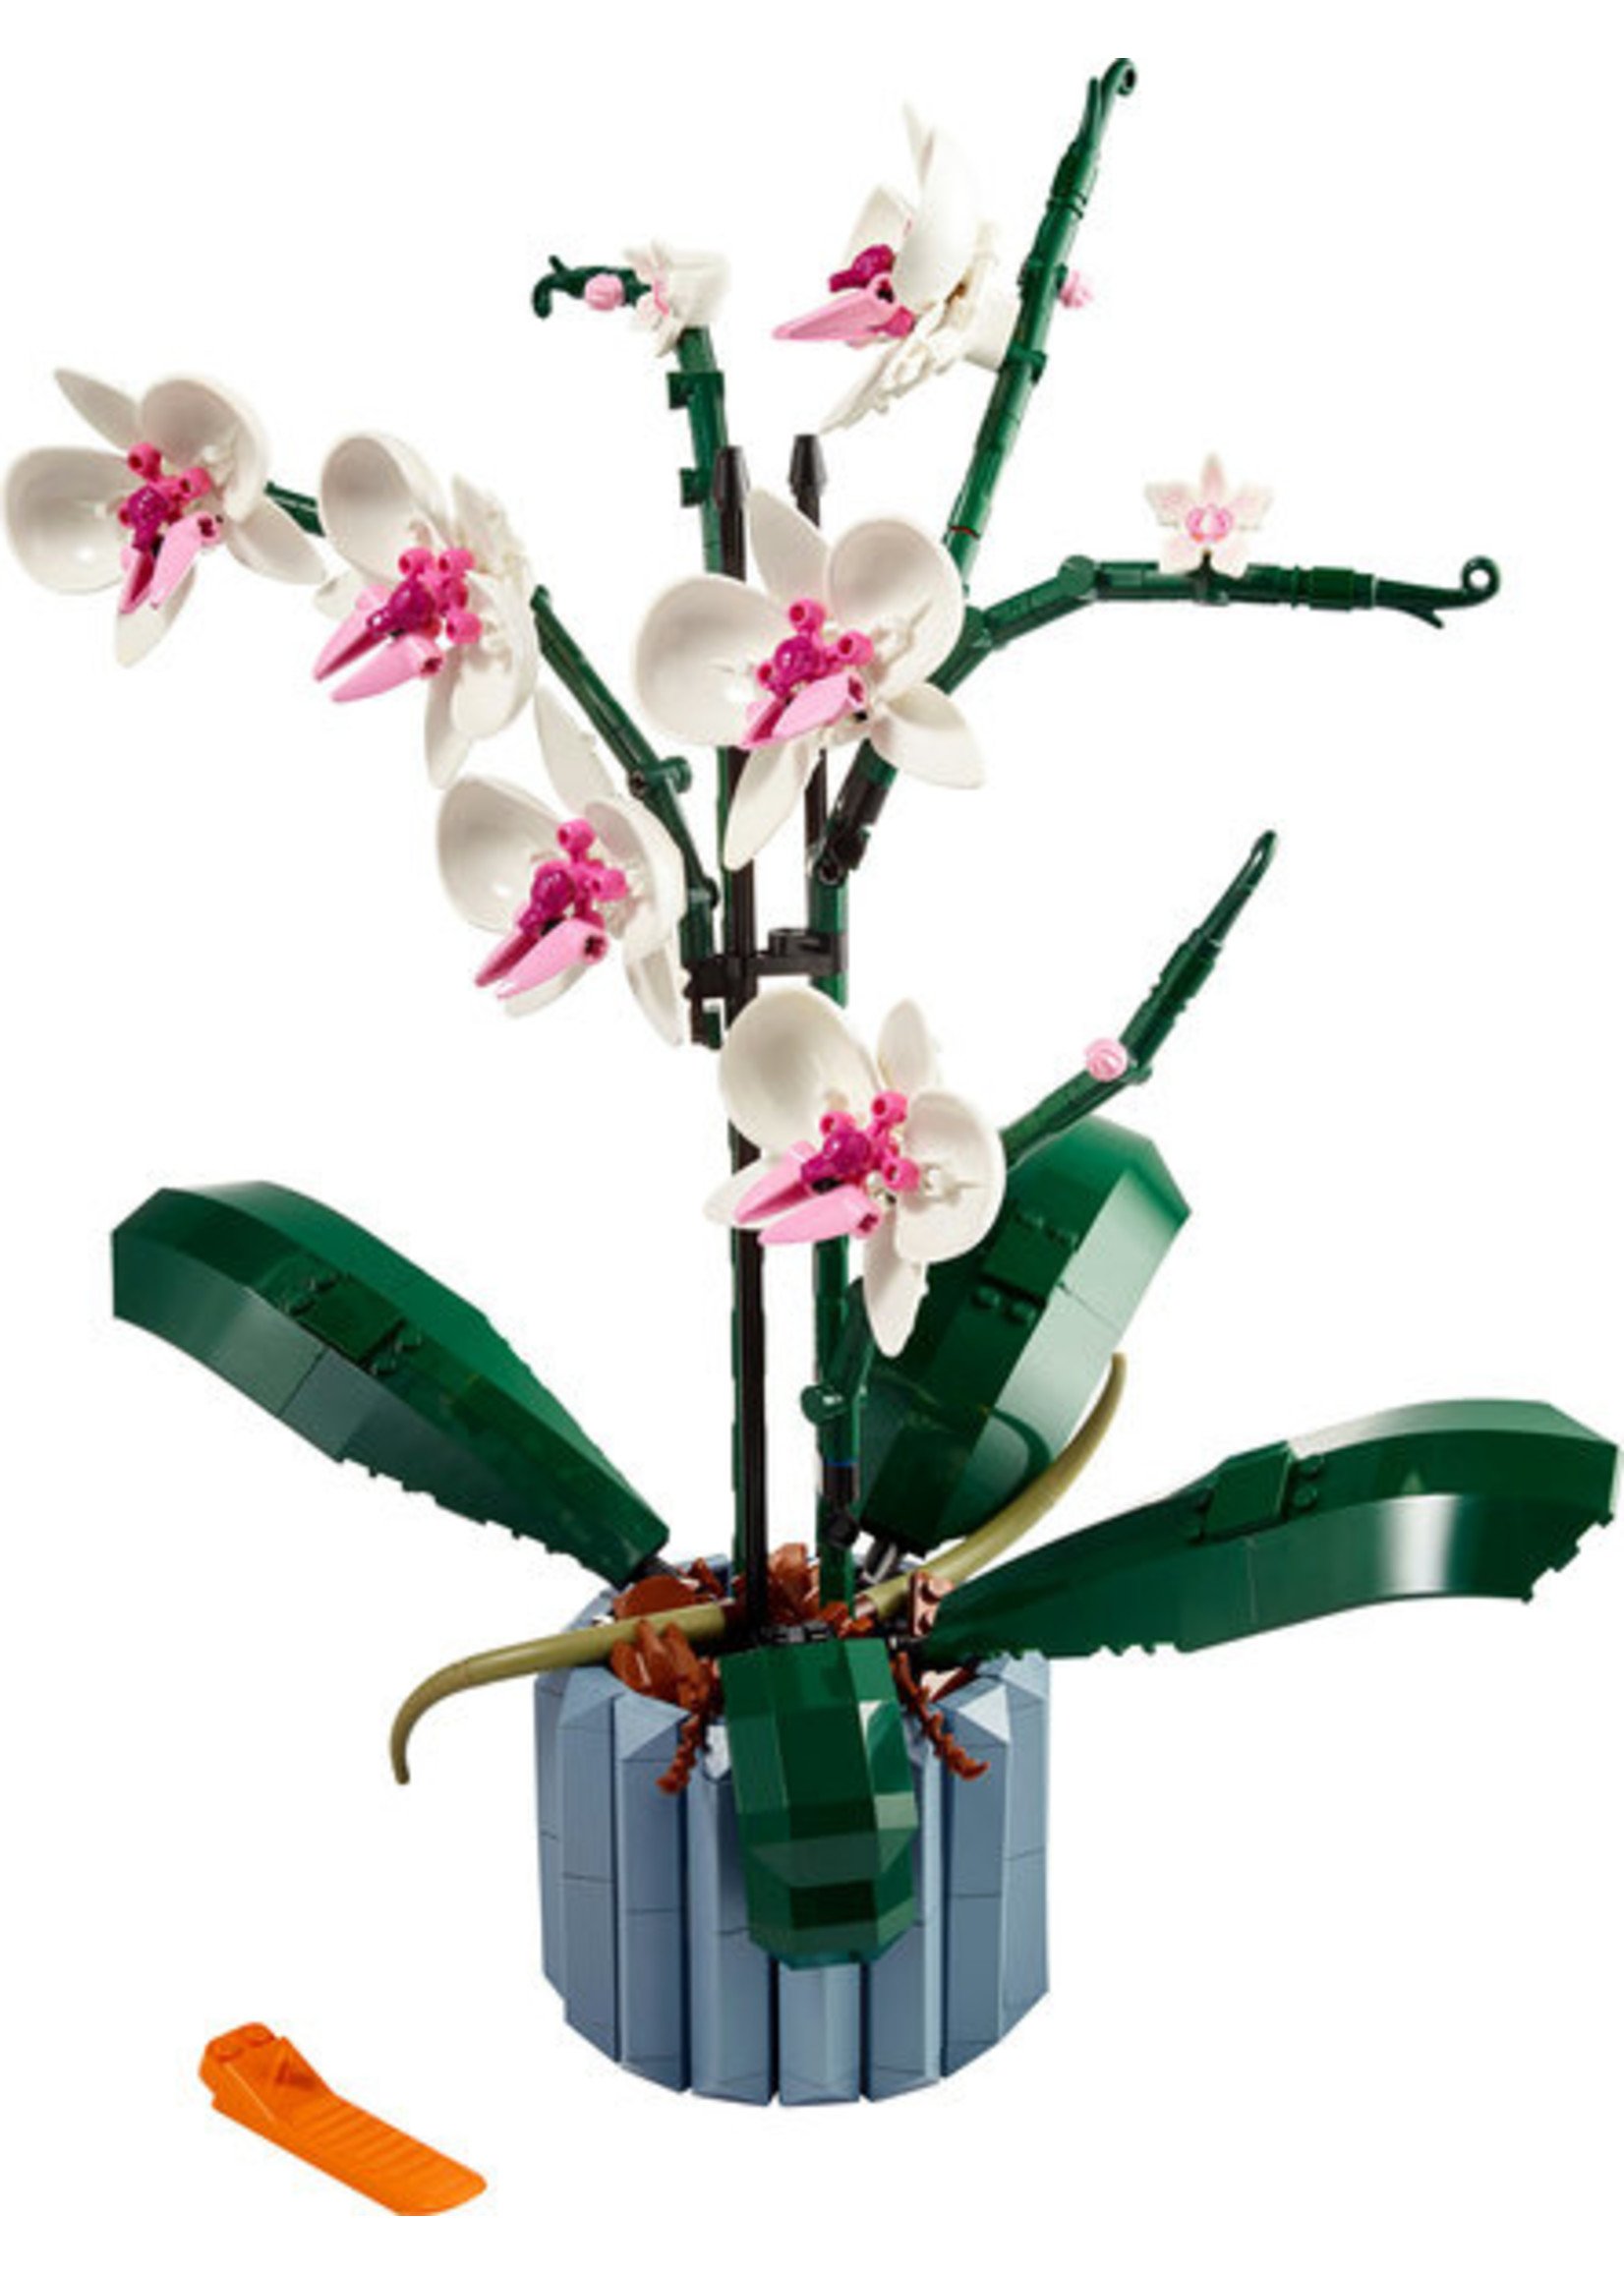 LEGO 10311 - Orchid